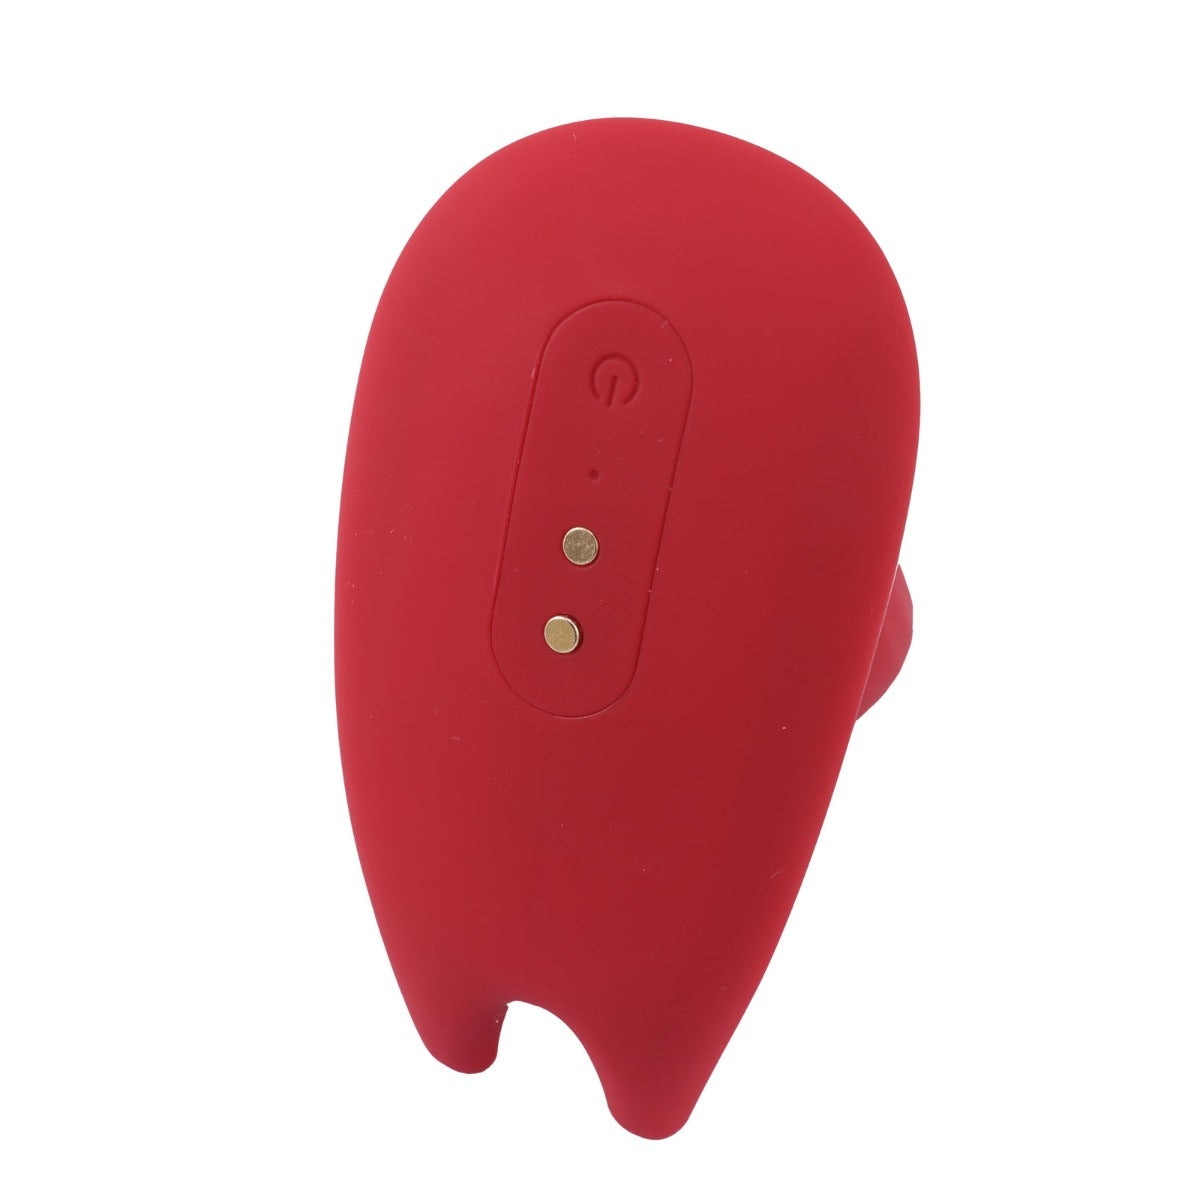 Magic Motion Umi Smart Lay On Vibrator App Controlled Red